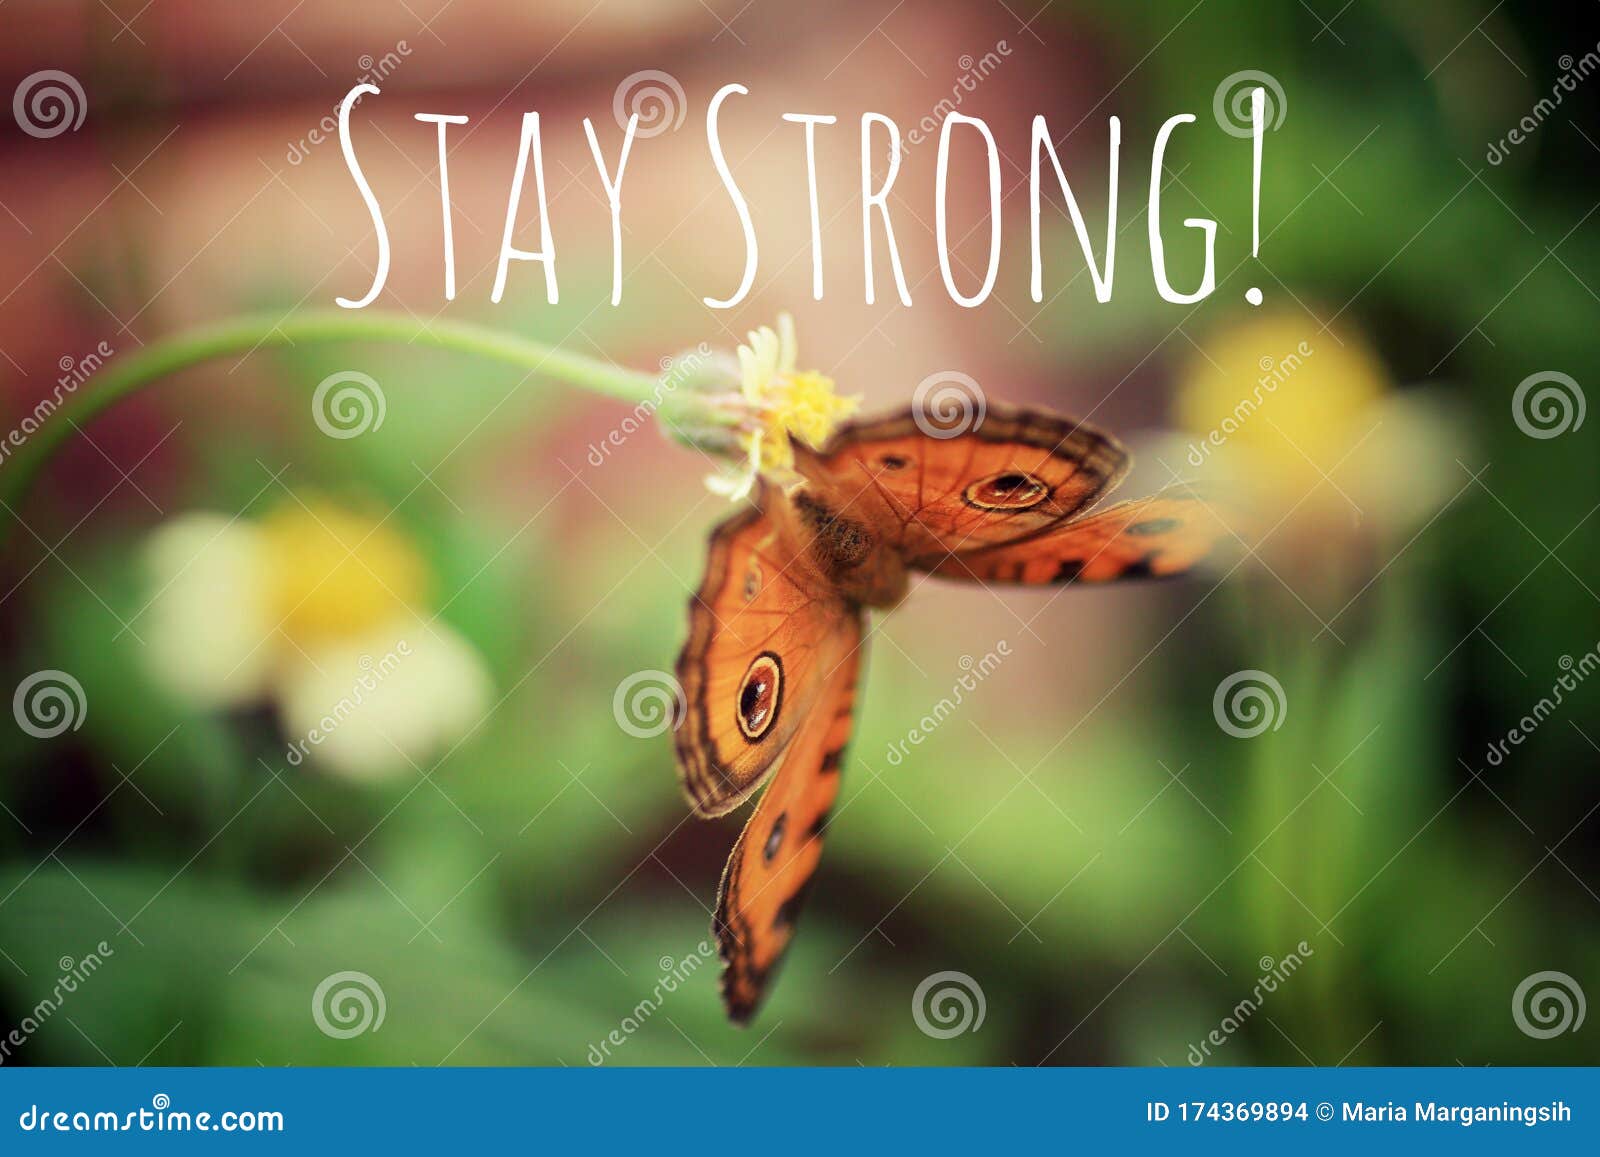 Inspirational Quote - Stay Strong. with a Beautiful Orange ...